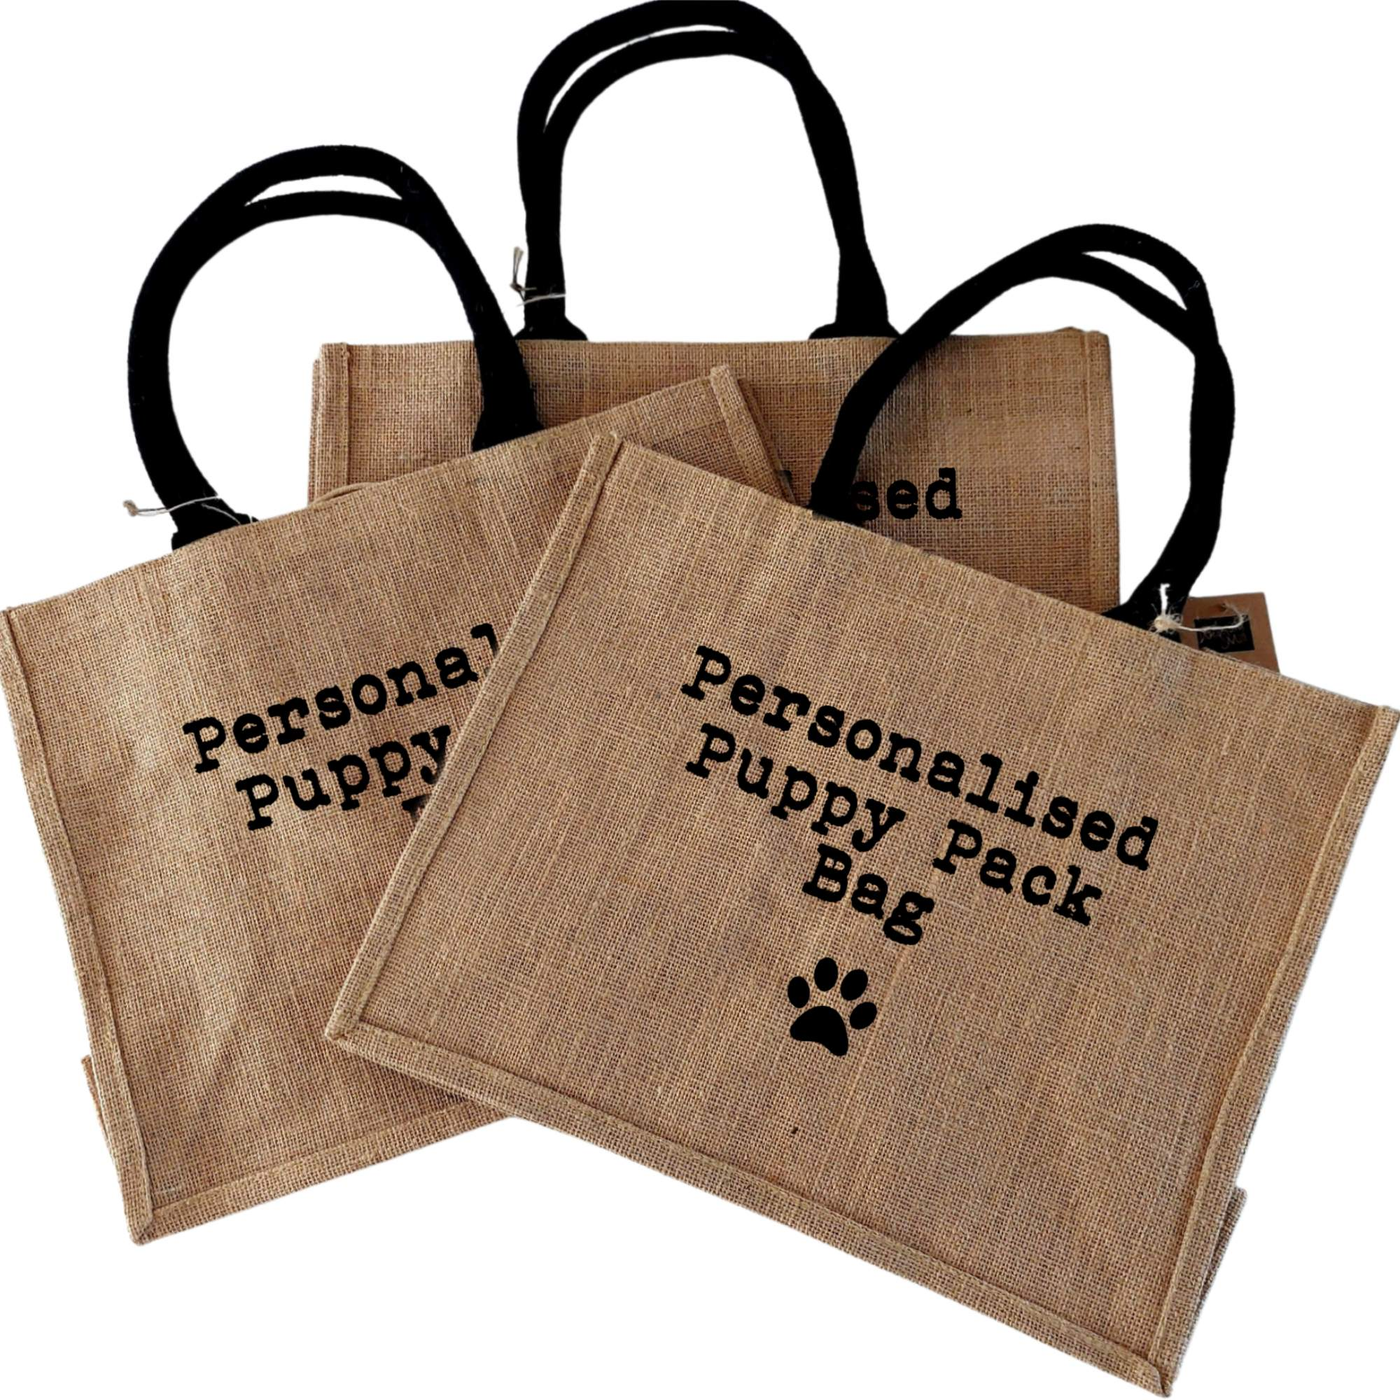 Puppy Packs - Breeder Gifts Personalised Tote Bags - Order any number-Worry Less Design-Dog-Gift,Dogs,personalised,Tote